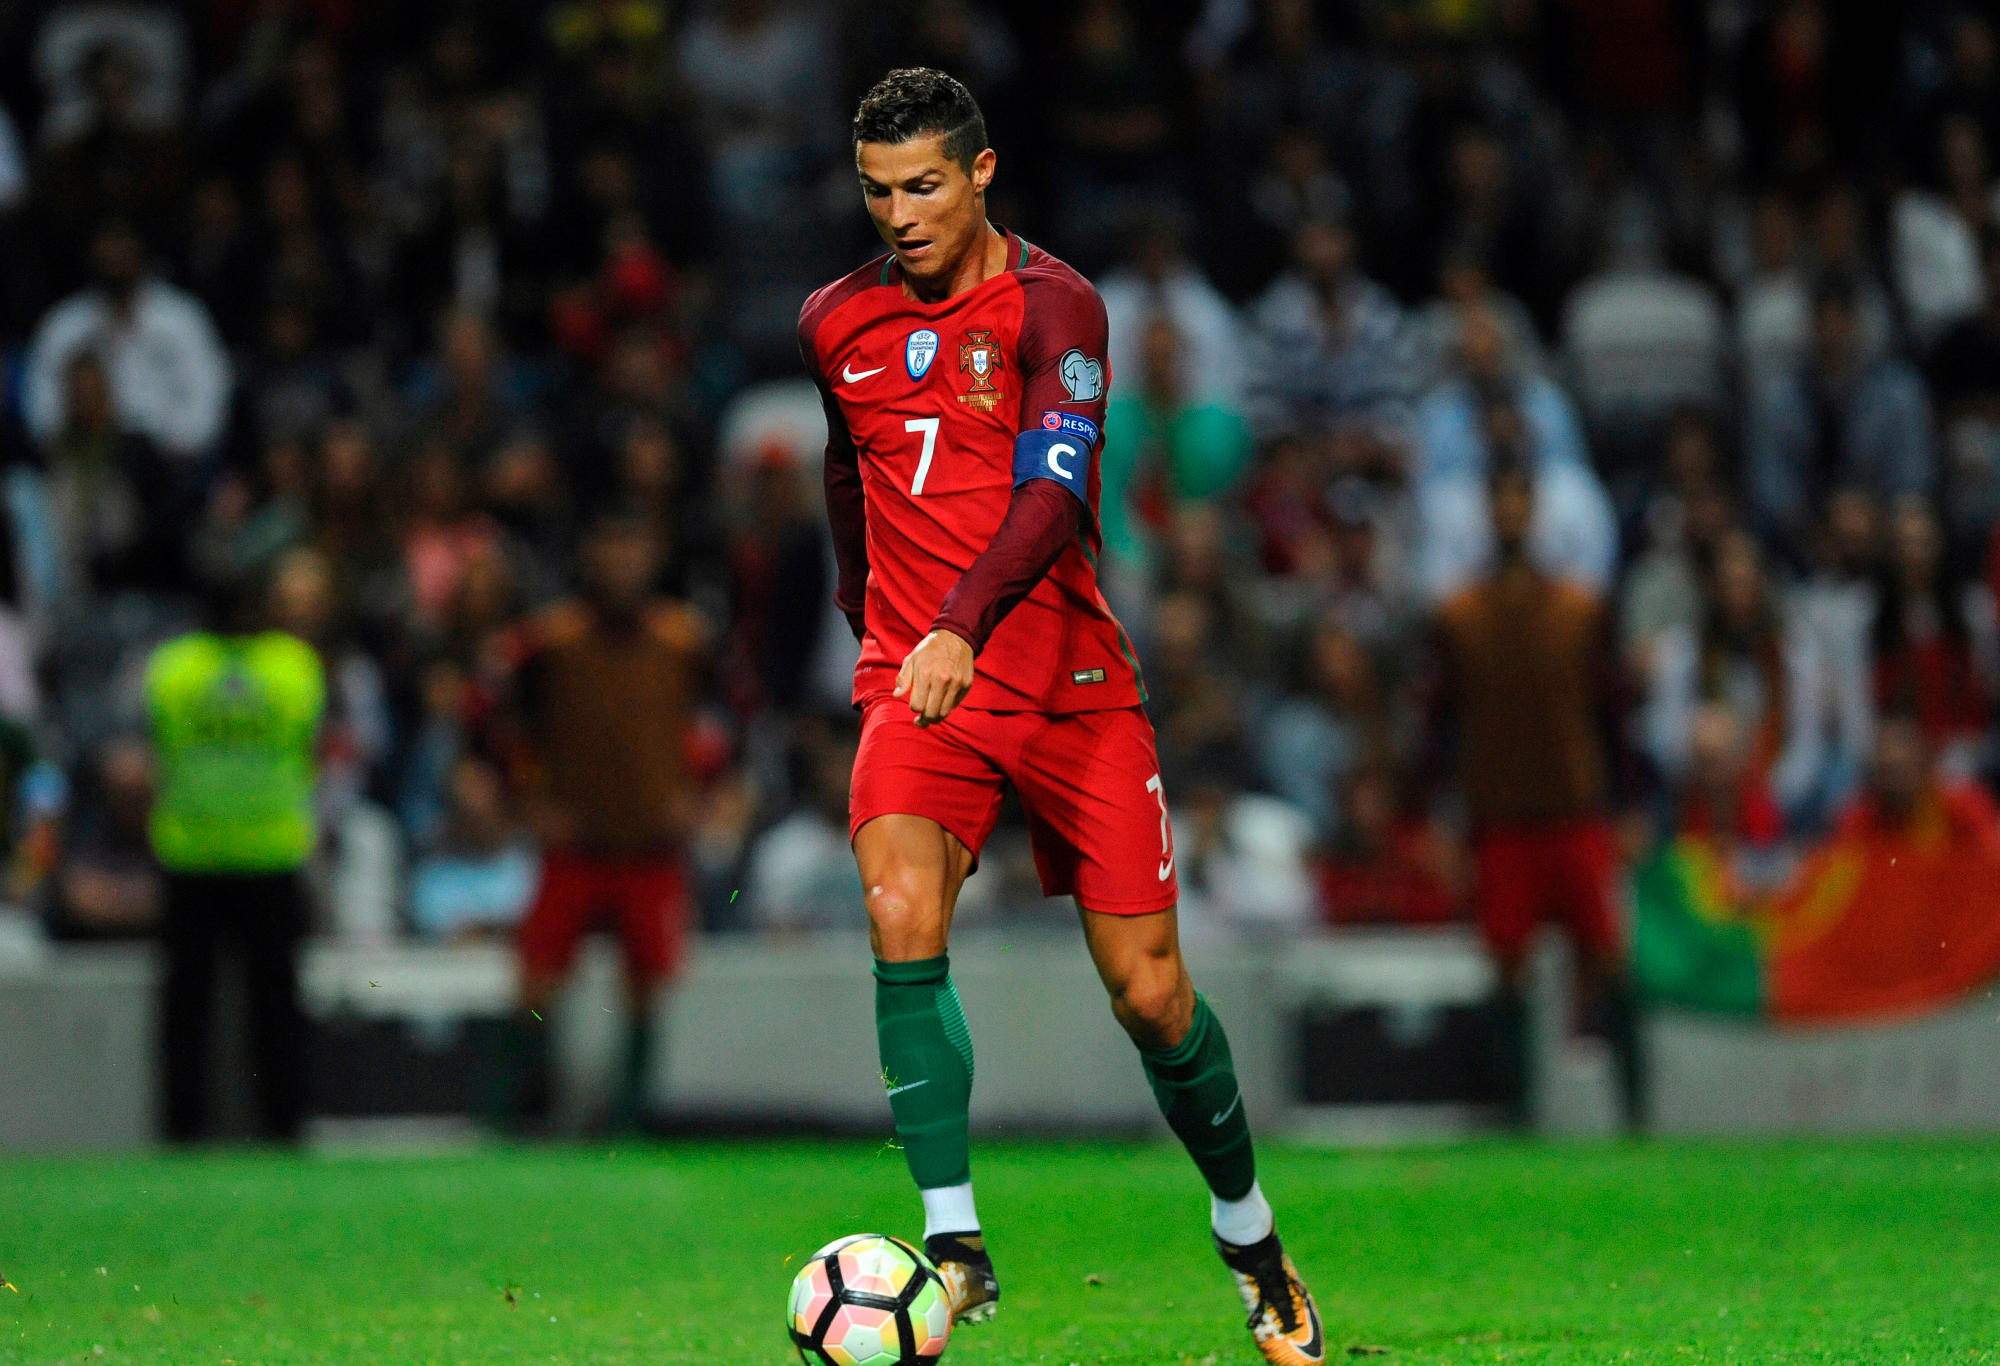 Portugal's Cristiano Ronaldo scores his side's fourth goal during the World Cup Group B qualifying soccer match between Portugal and Faroe Islands at the Bessa Stadium in Porto, Portugal.